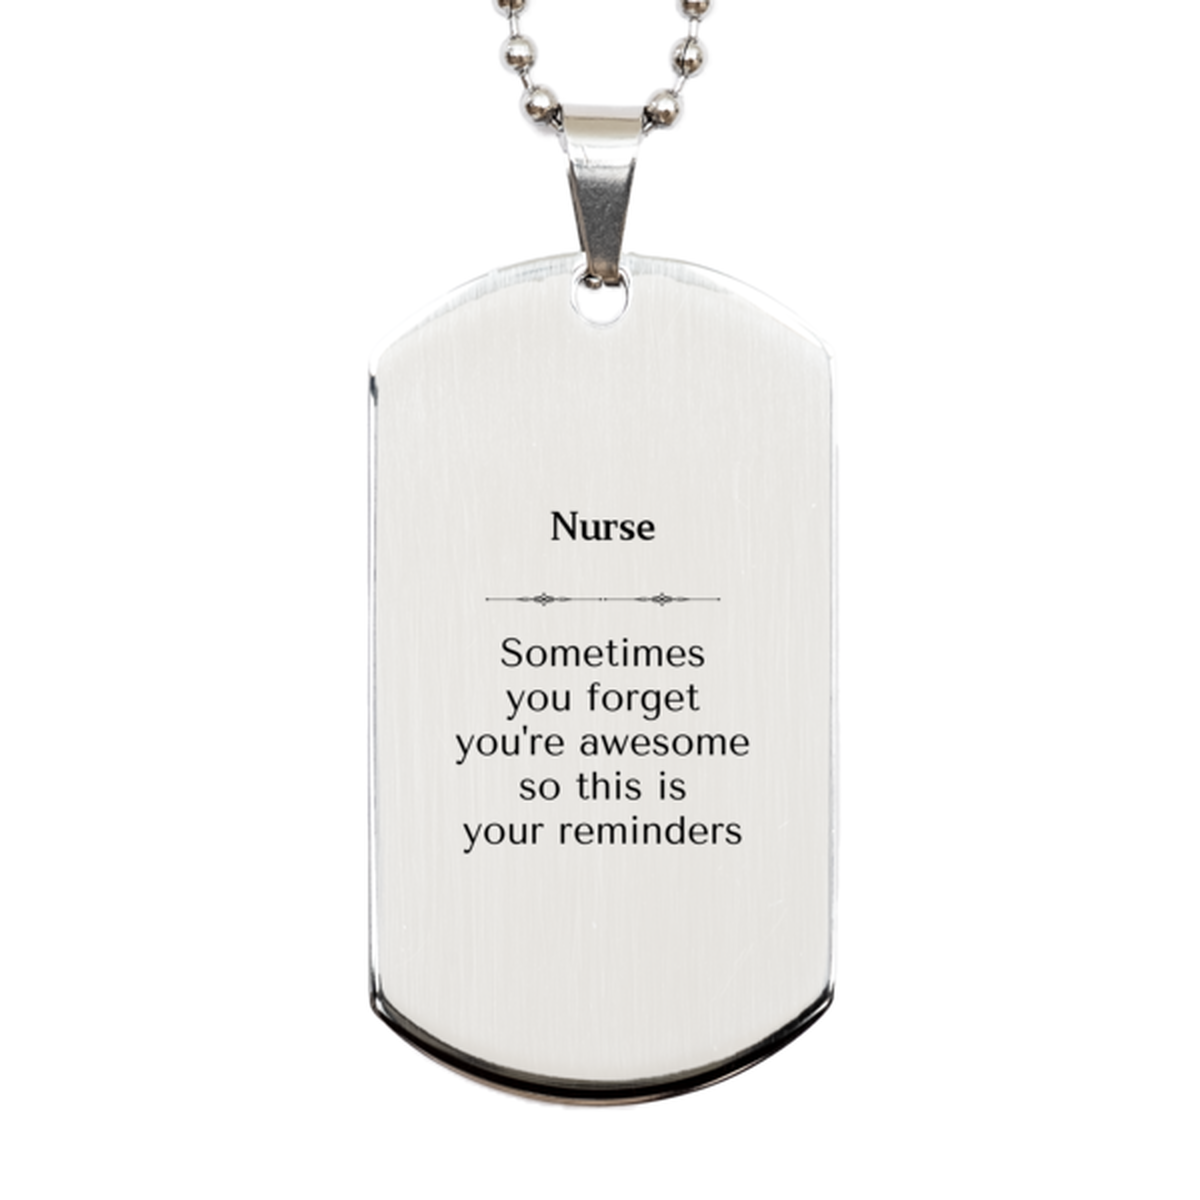 Sentimental Nurse Silver Dog Tag, Nurse Sometimes you forget you're awesome so this is your reminders, Graduation Christmas Birthday Gifts for Nurse, Men, Women, Coworkers